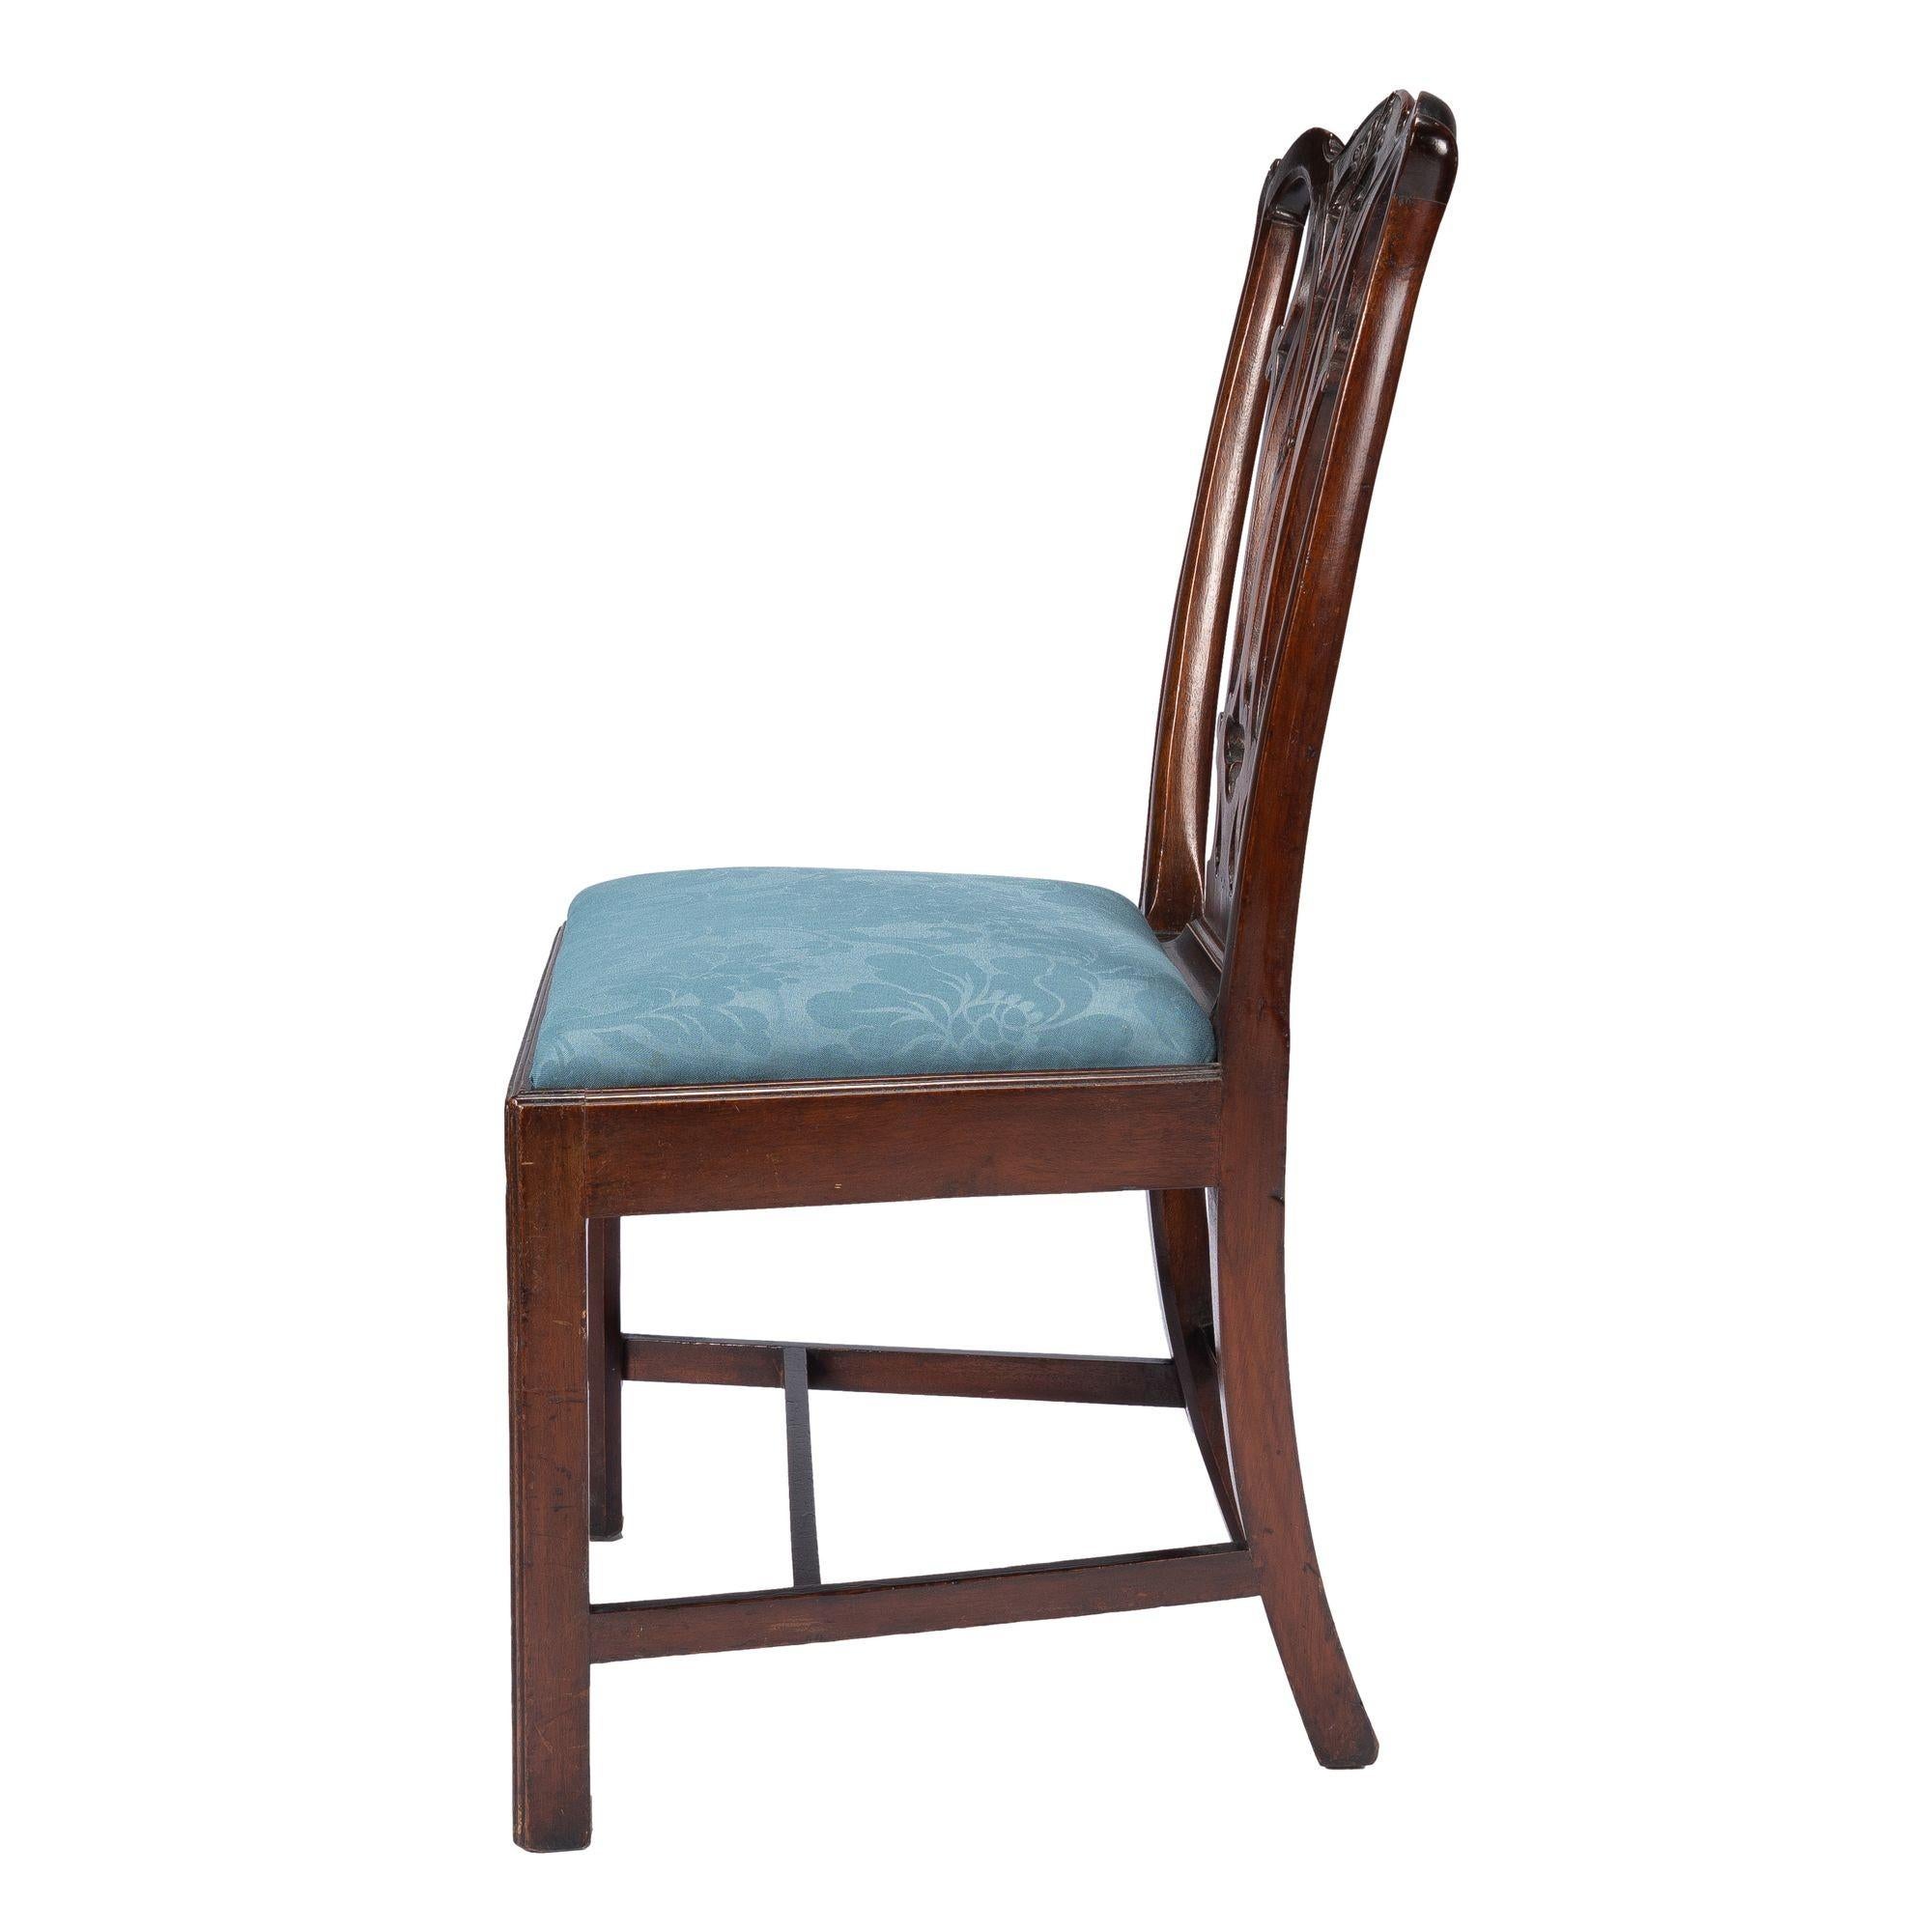 American Philadelphia Chippendale Mahogany Slip Seat Side Chair by Thomas Tuft, 1770 For Sale